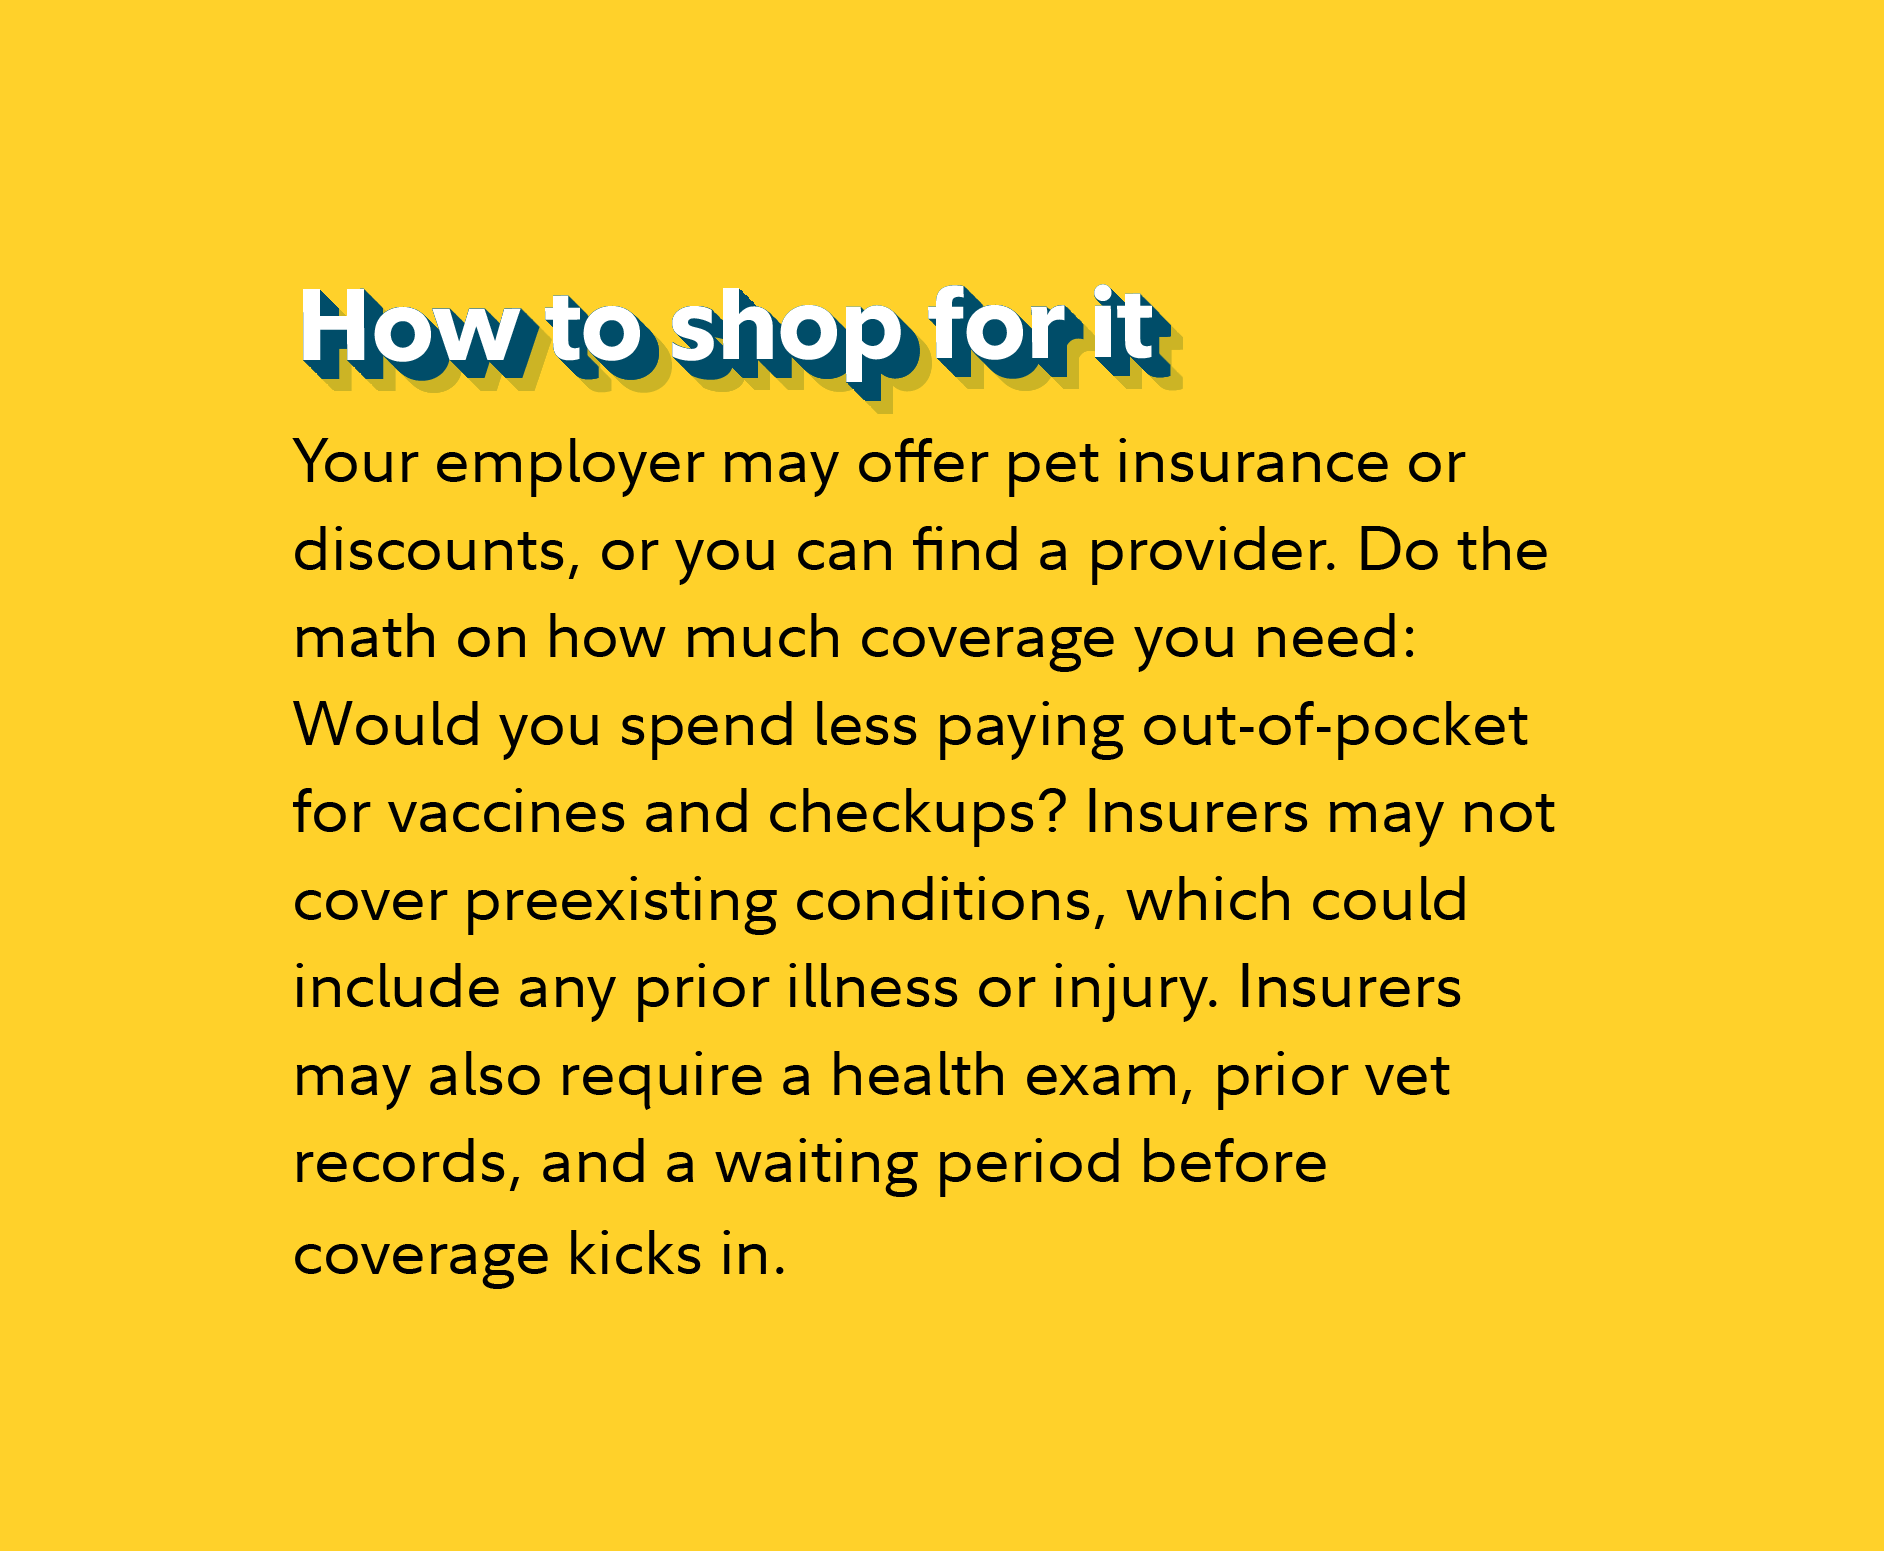 How to shop for it Your employer may offer pet insurance or discounts, or you can find a provider. Do the math on how much coverage you need: Would you spend less paying out-of-pocket for vaccines and checkups? Insurers may not cover preexisting conditions, which could include any prior illness or injury. Insurers may also require a health exam, prior vet records, and a waiting period before coverage kicks in.